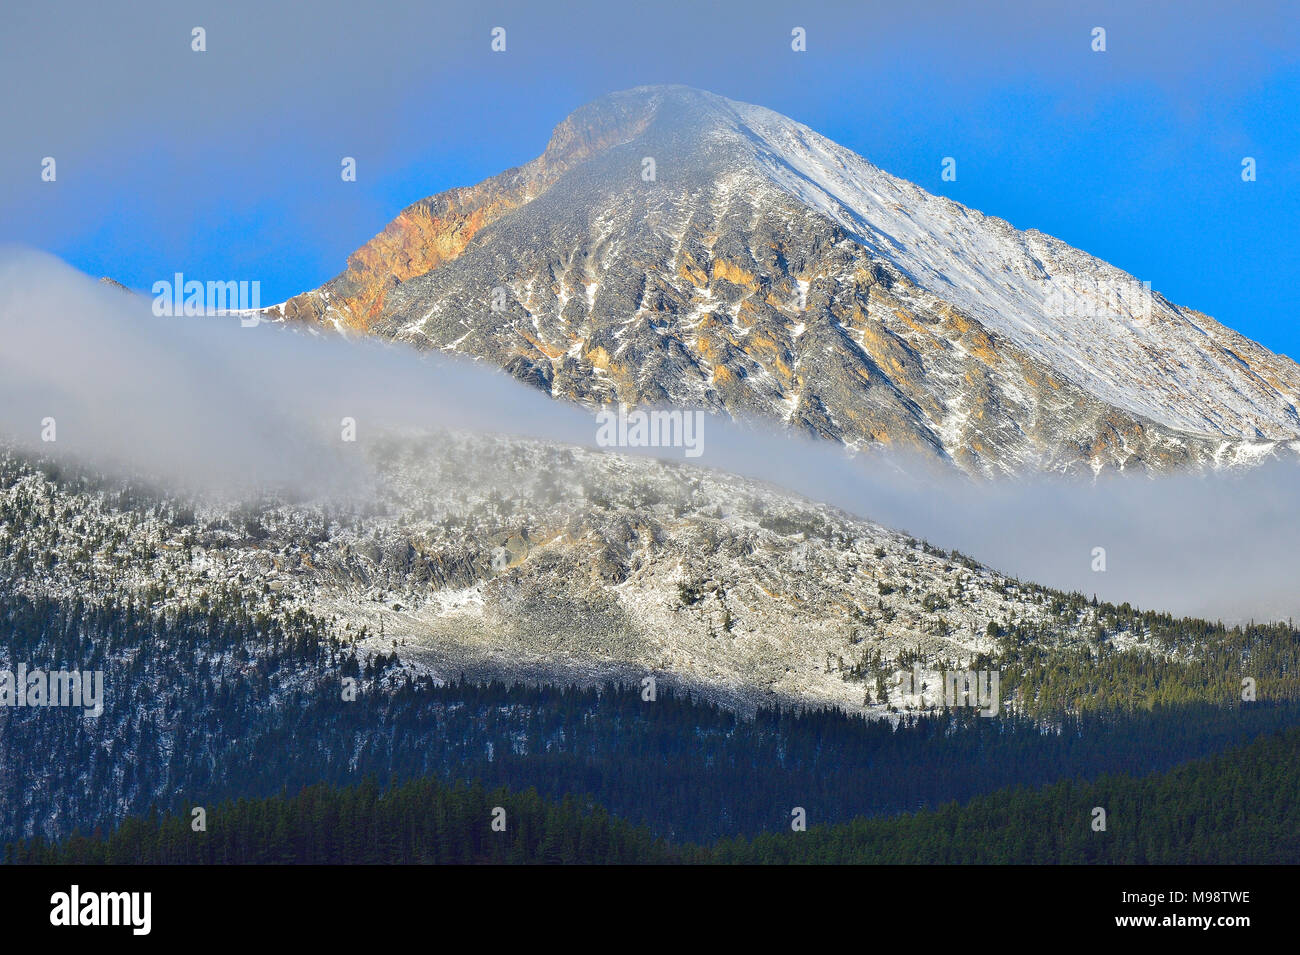 A tall mountain in Jasper National Park stands with wisps of cloud around it on a bright autumn day Stock Photo